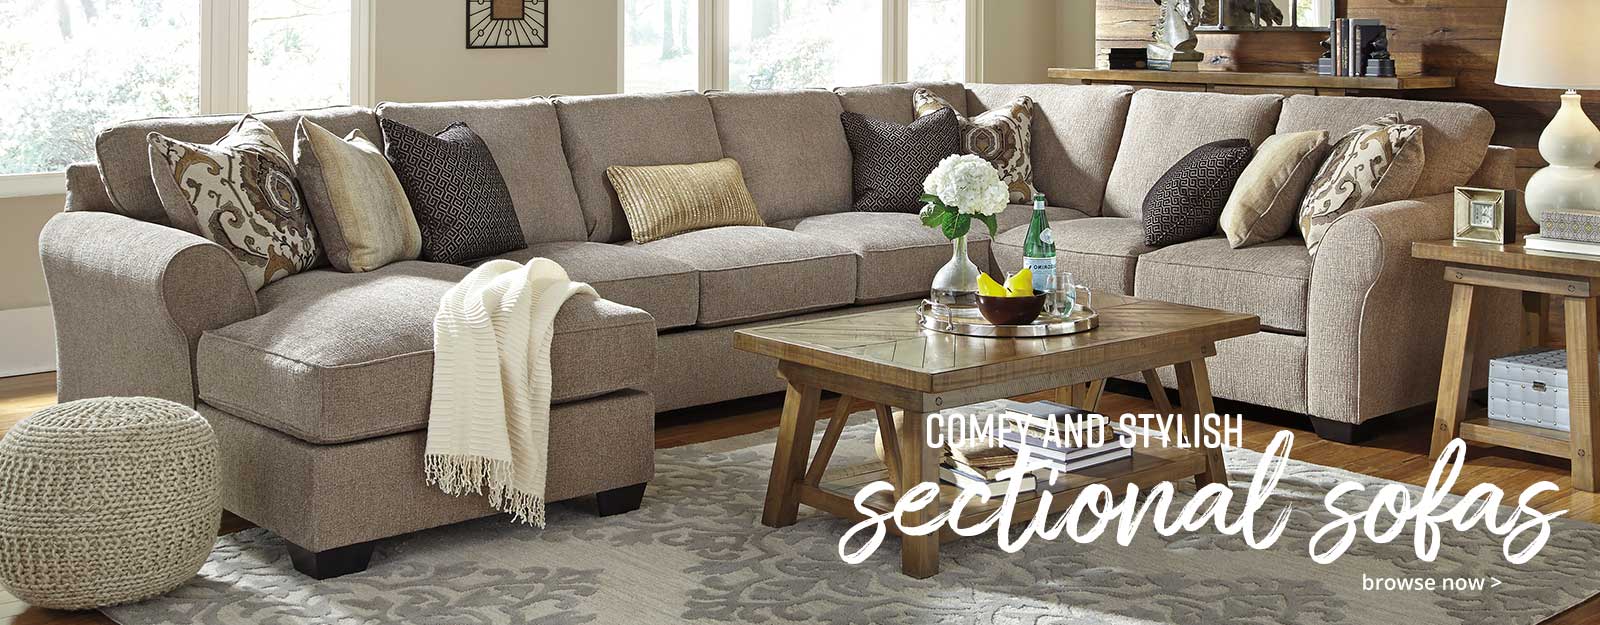 Cozy Sectionals